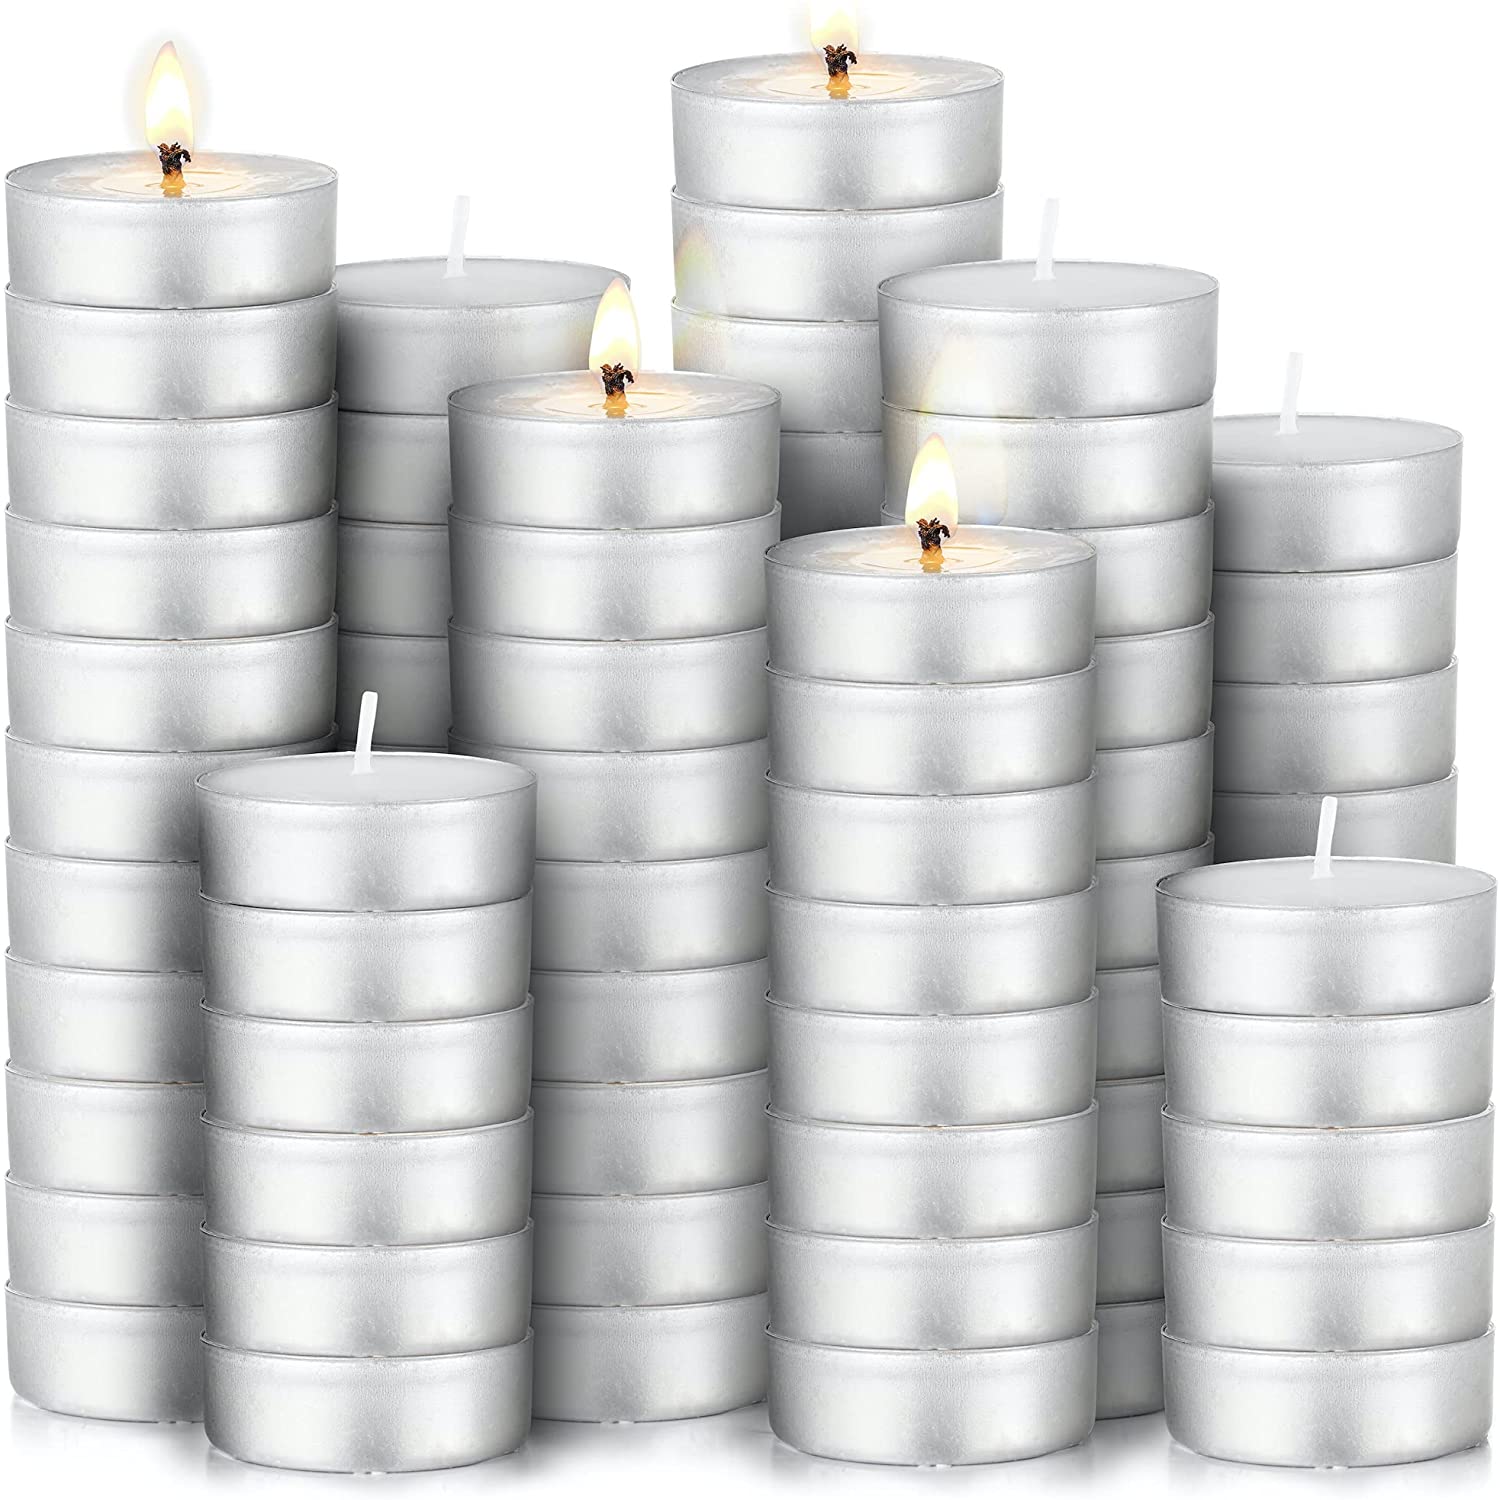 Simple Craft Tea Lights Candles - Unscented Pack from Zulay Kitchen